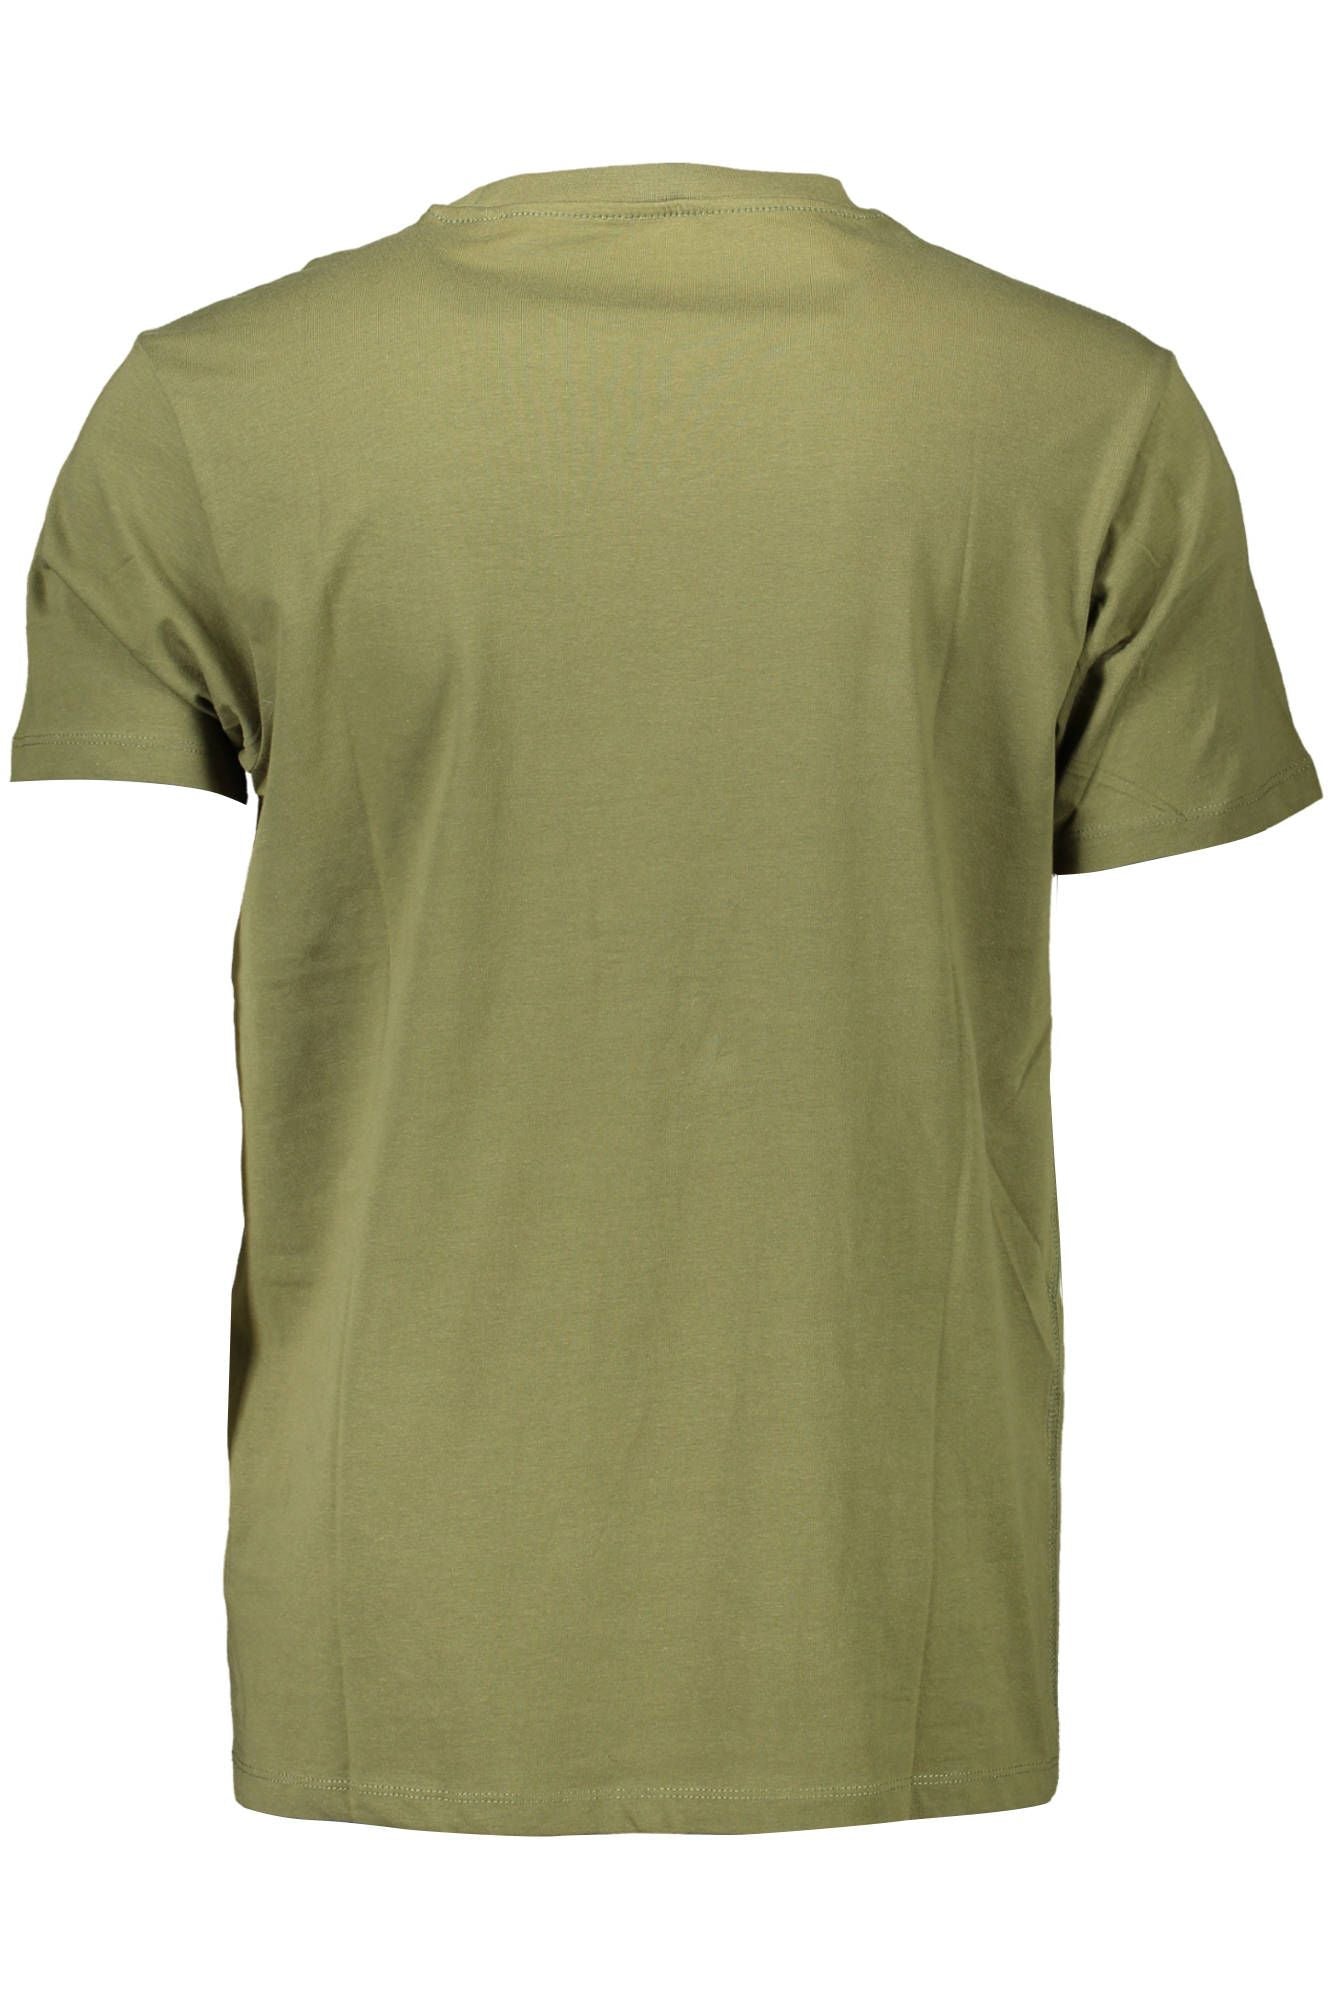 Chic Green Crew Neck Tee with Iconic Print